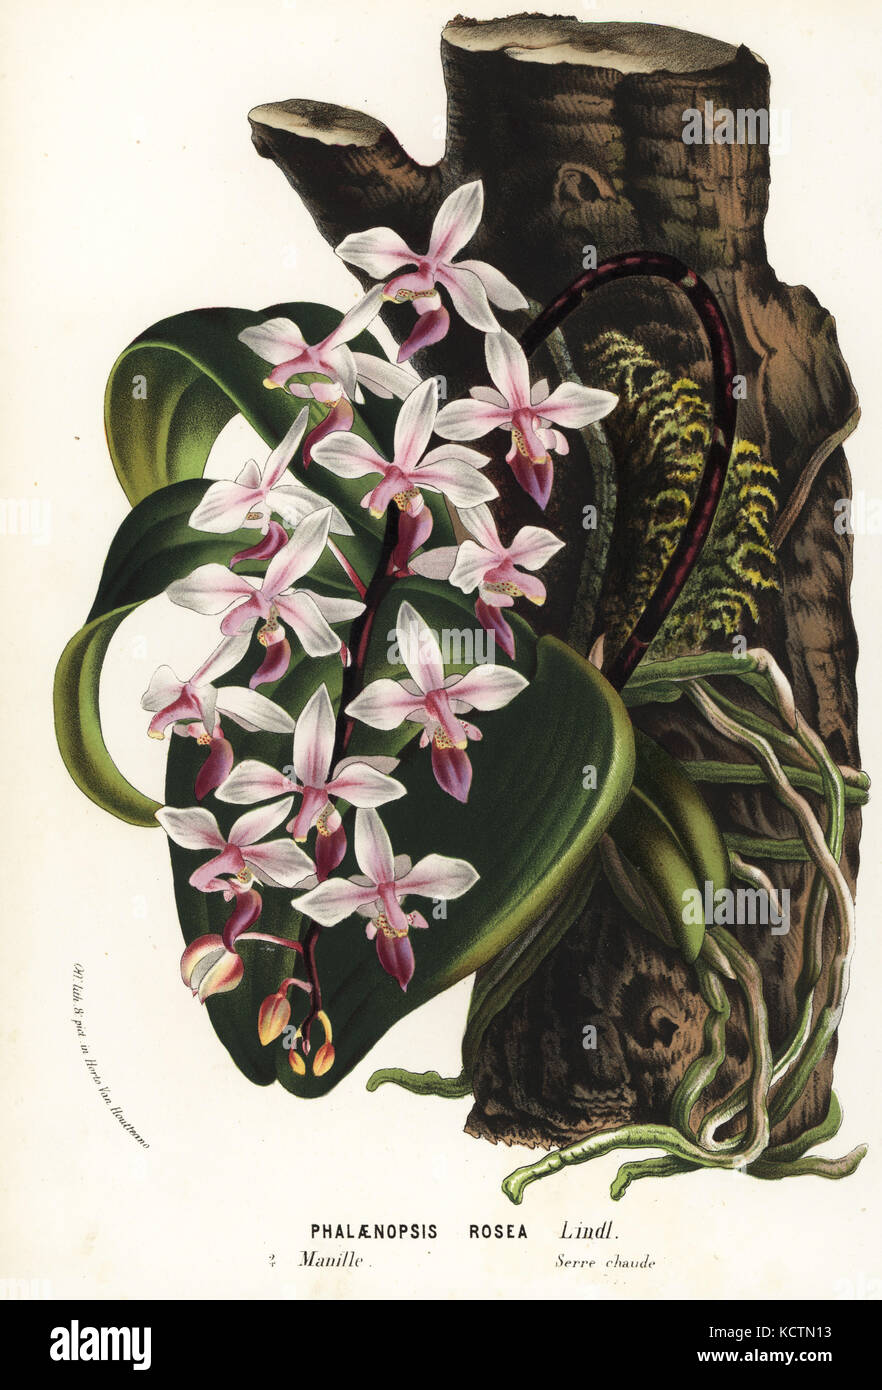 Phalaenopsis equestris var. rosea orchid (Phalaenopsis rosea). Handcoloured lithograph from Louis van Houtte and Charles Lemaire's Flowers of the Gardens and Hothouses of Europe, Flore des Serres et des Jardins de l'Europe, Ghent, Belgium, 1867-1868. Stock Photo